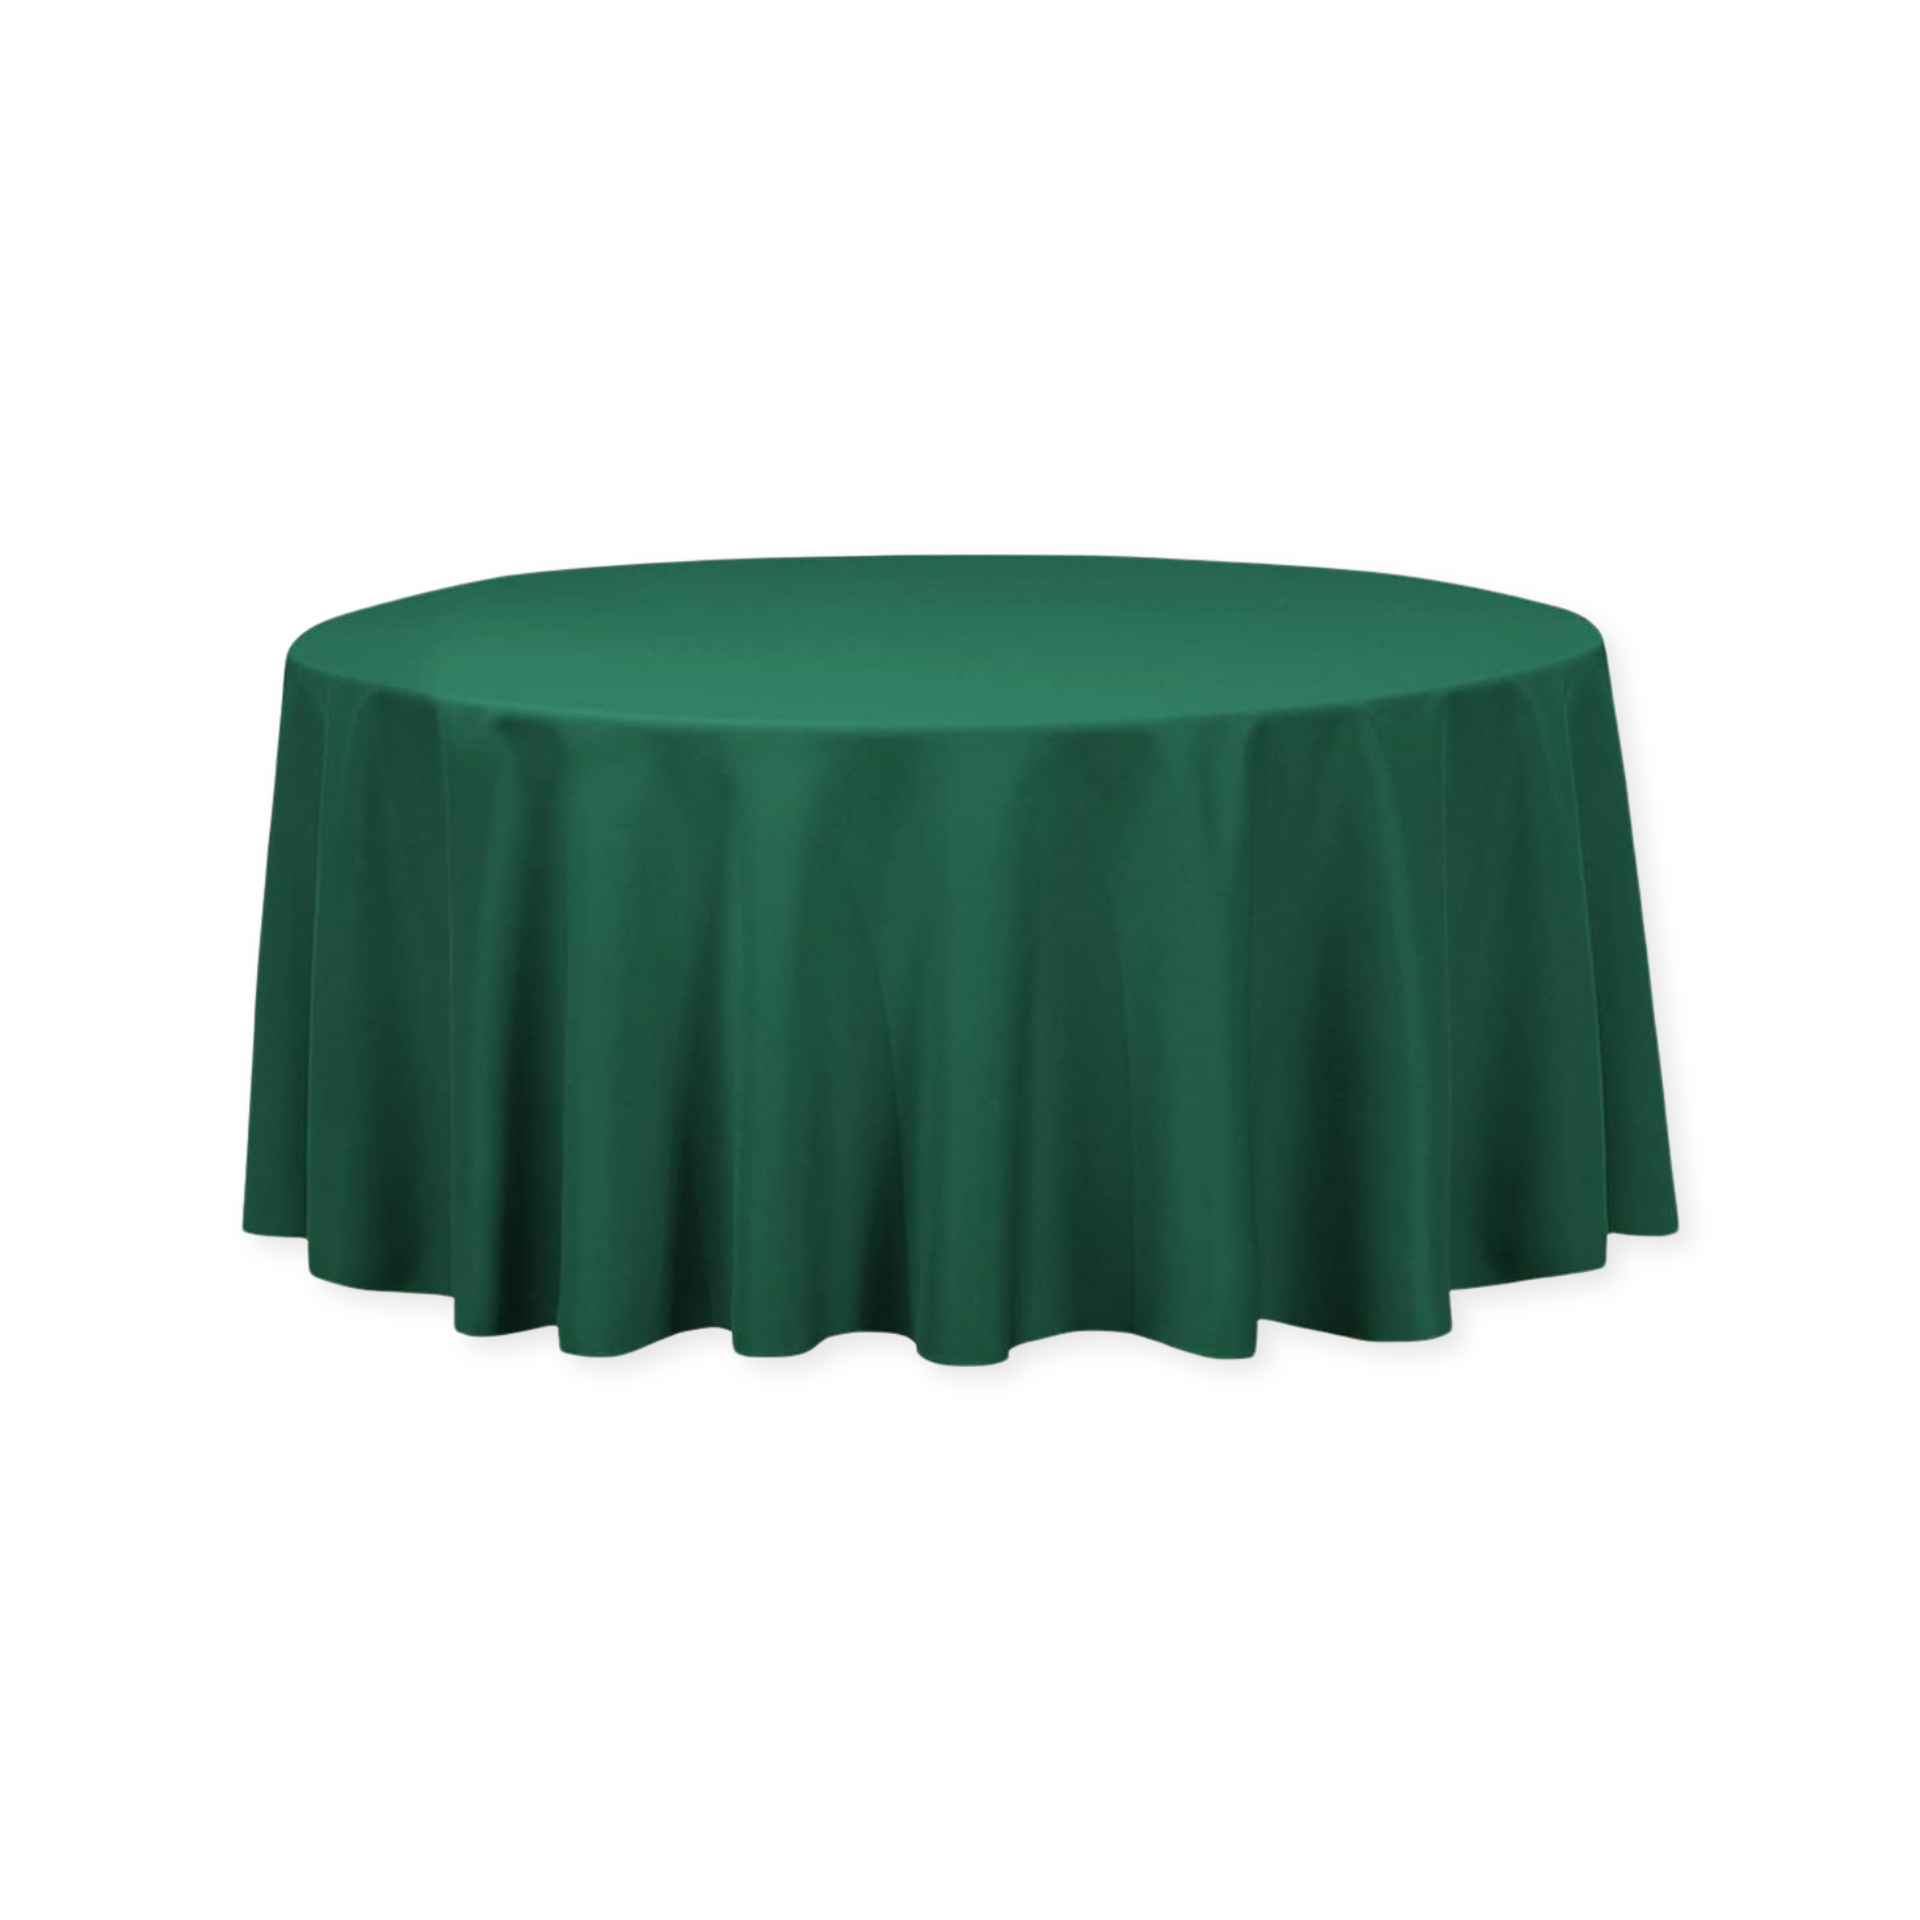 Tablecloth polyester round emerald green  commercial grade wedding party event rental panama city beach